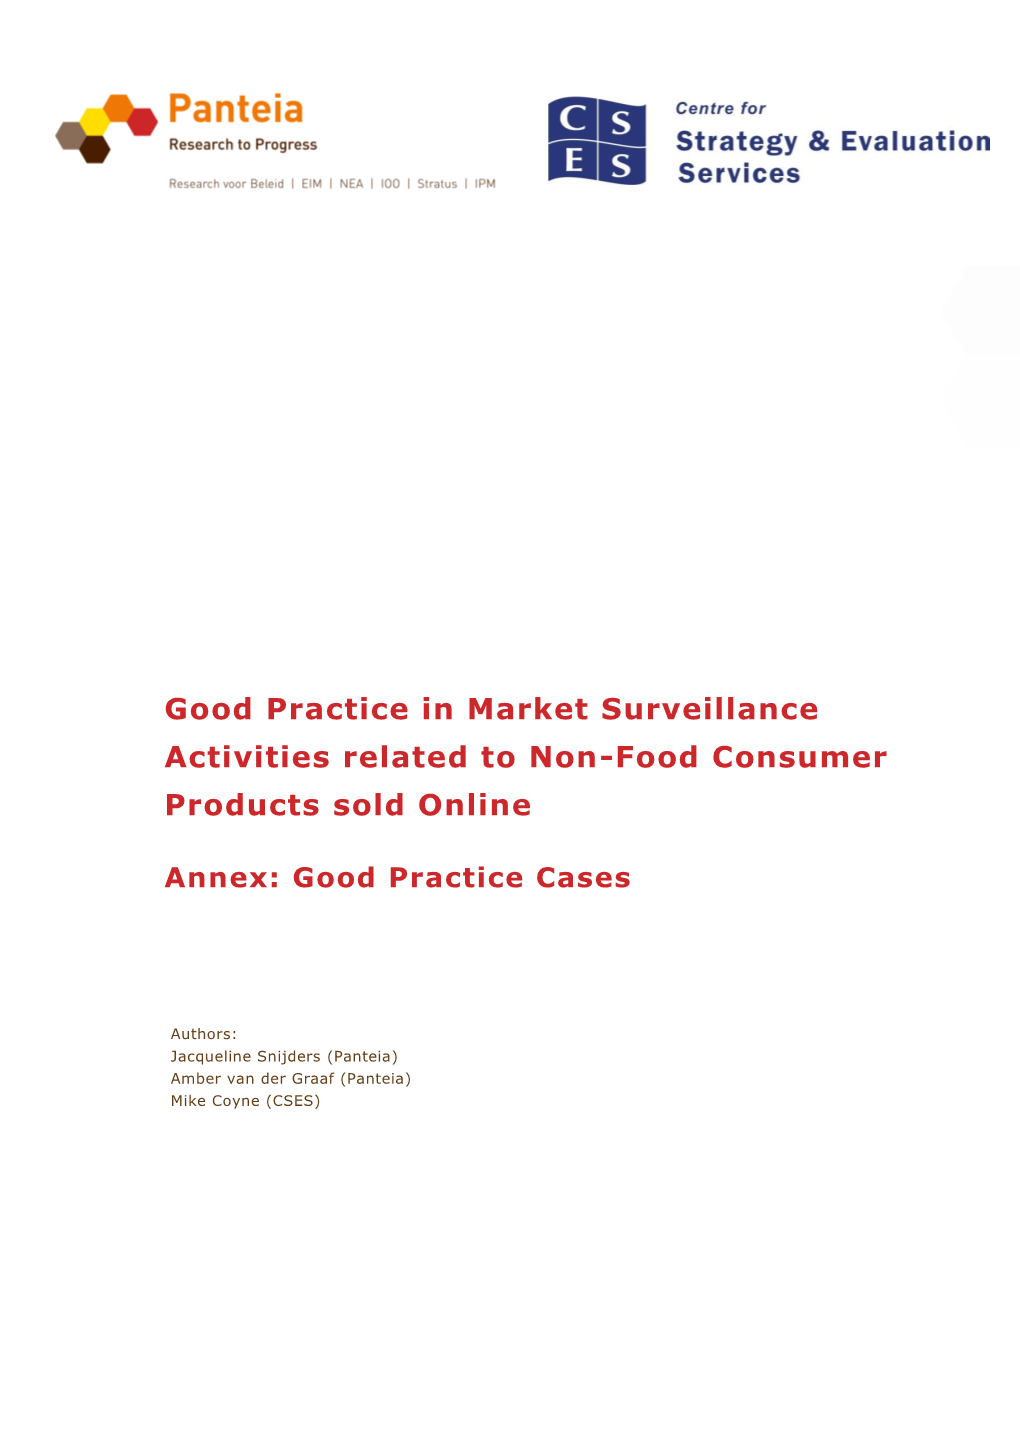 Good Practice in Market Surveillance Activities Related to Non-Food Consumer Products Sold Online